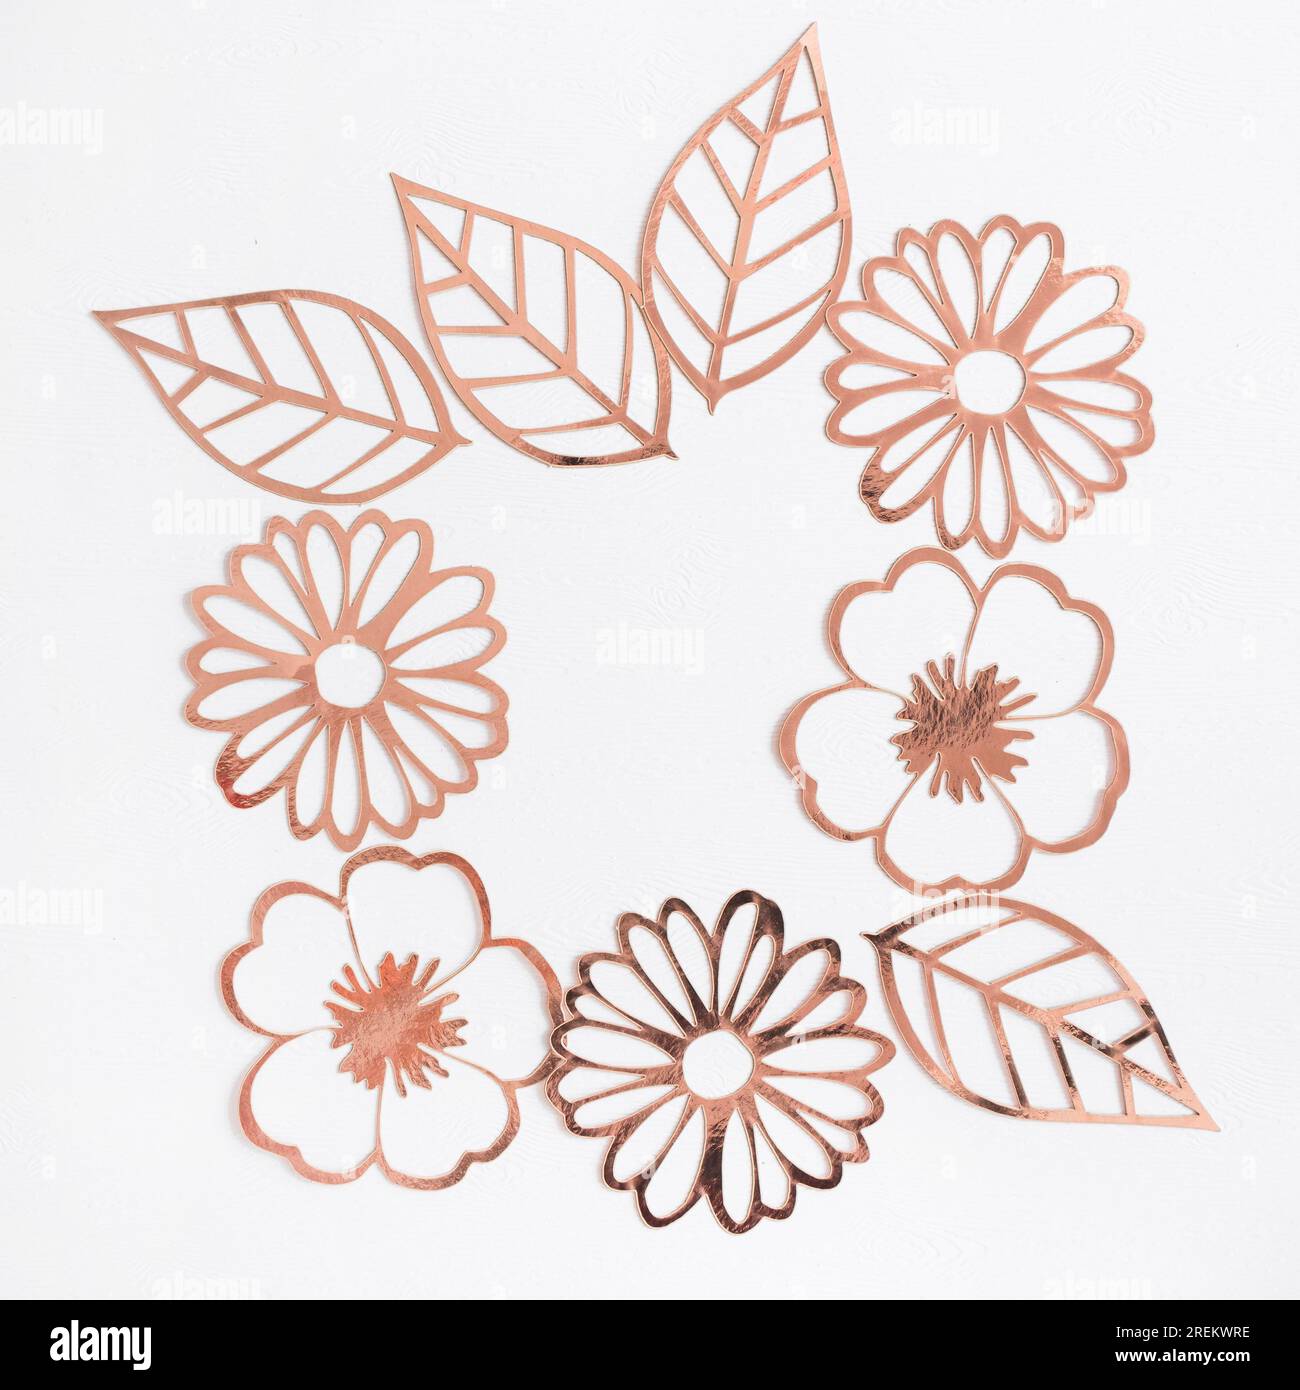 Laser cutting flower leaves white background Stock Photo